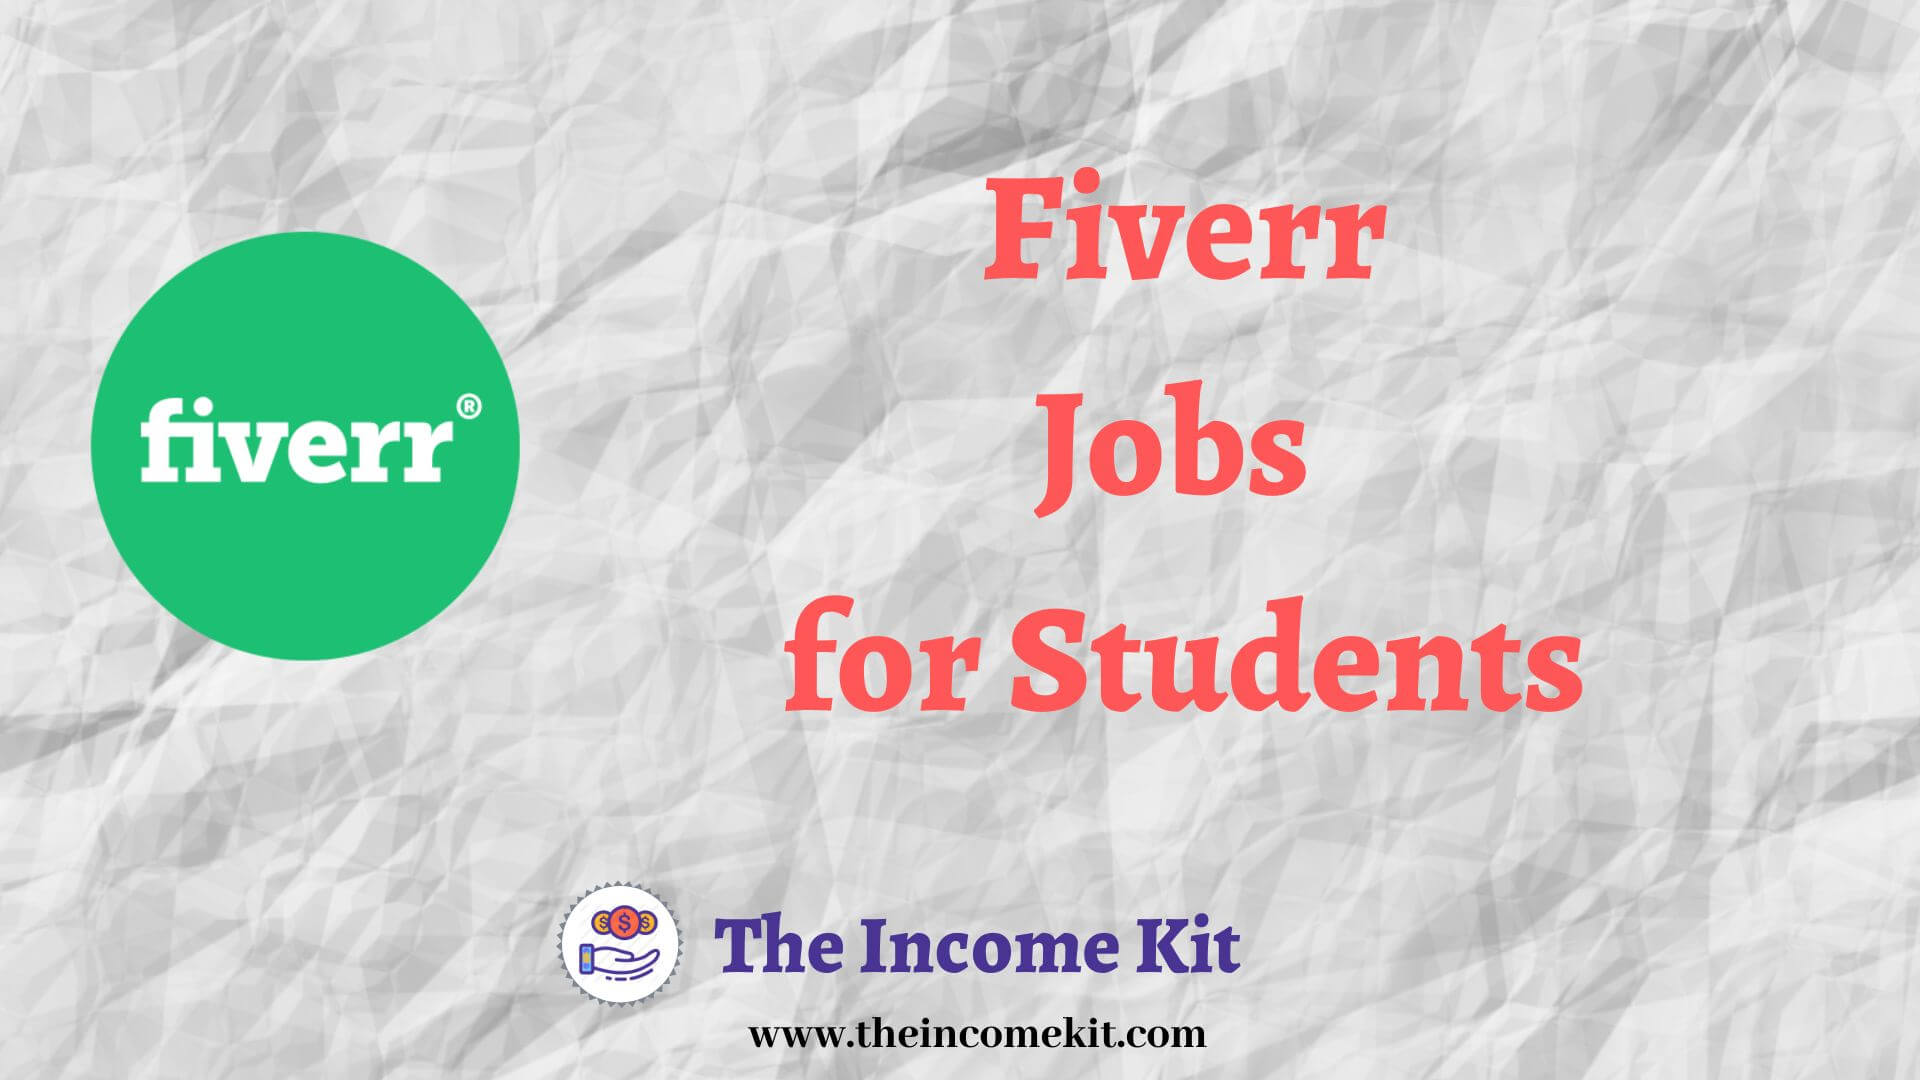 fiverr jobs for students